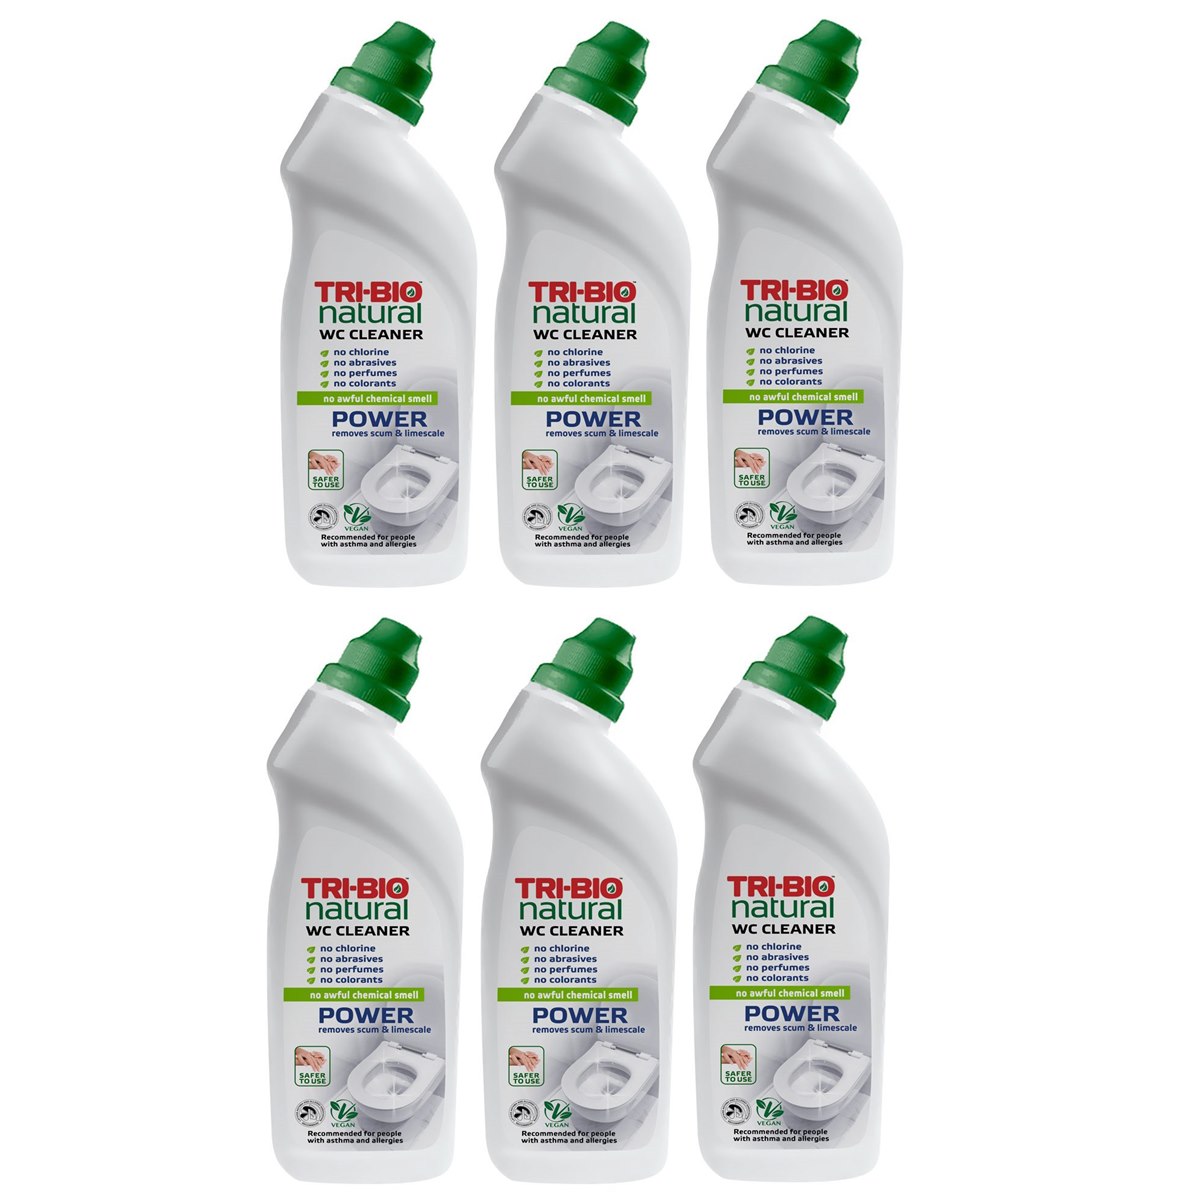 Case of 6 x Tri-Bio Natural WC Toilet Power Cleaner 710ml